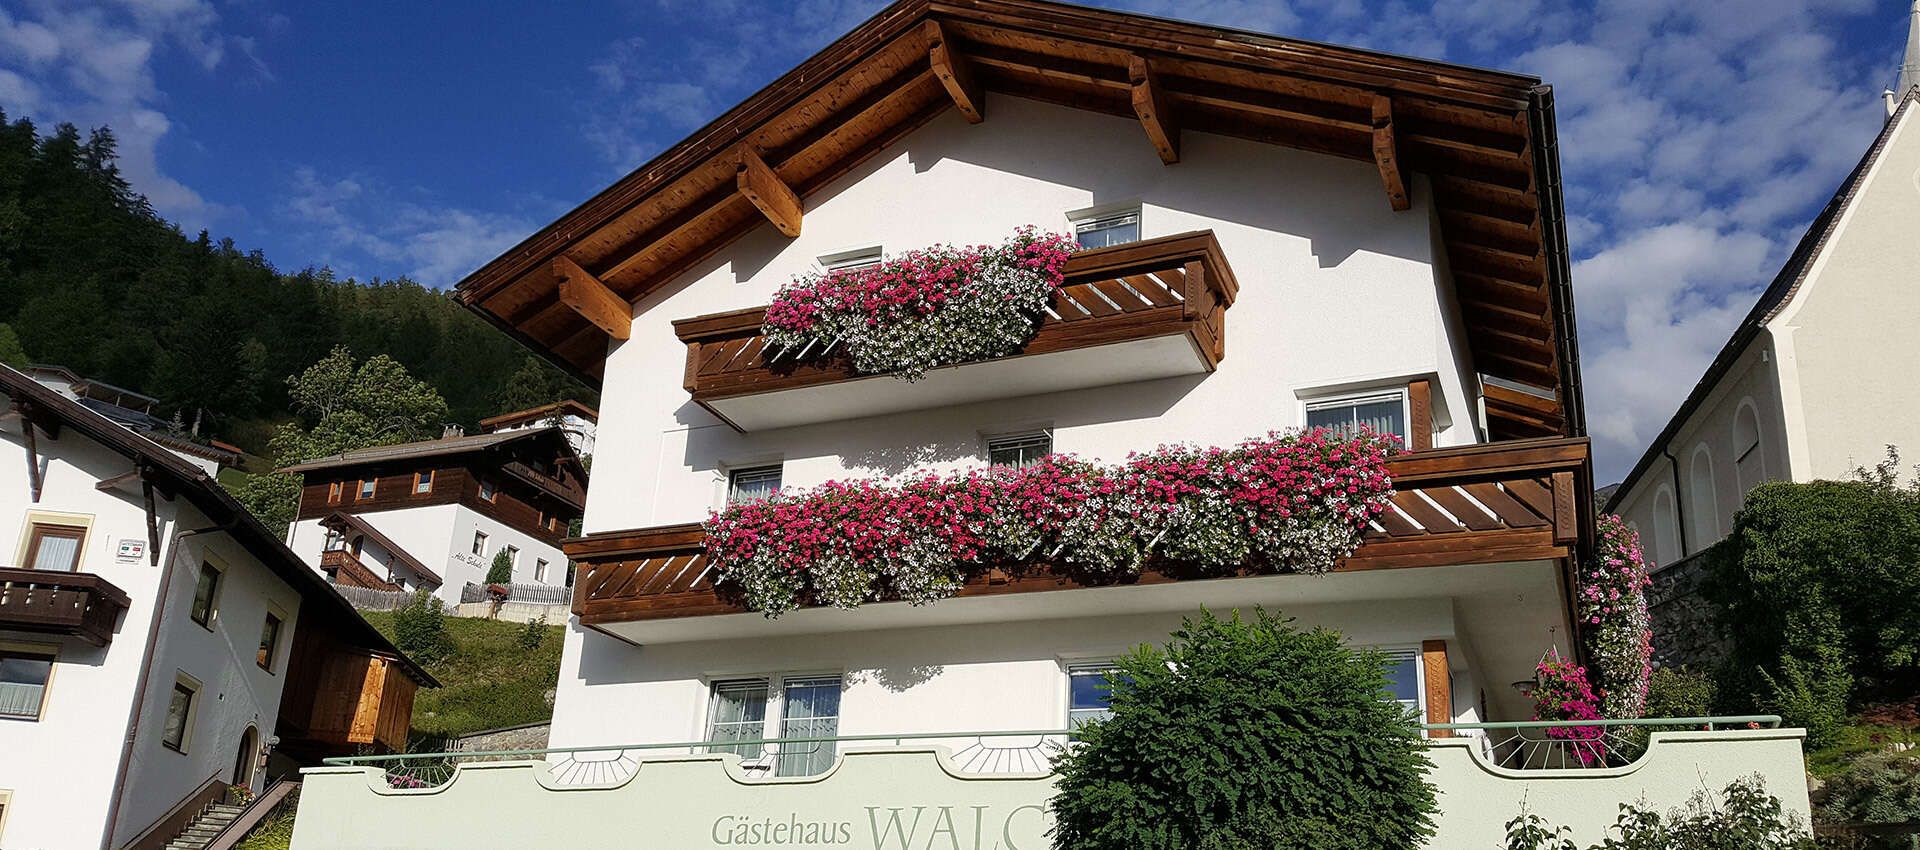 Guesthouse Walch with apartments in Fendels in the Kaunertal